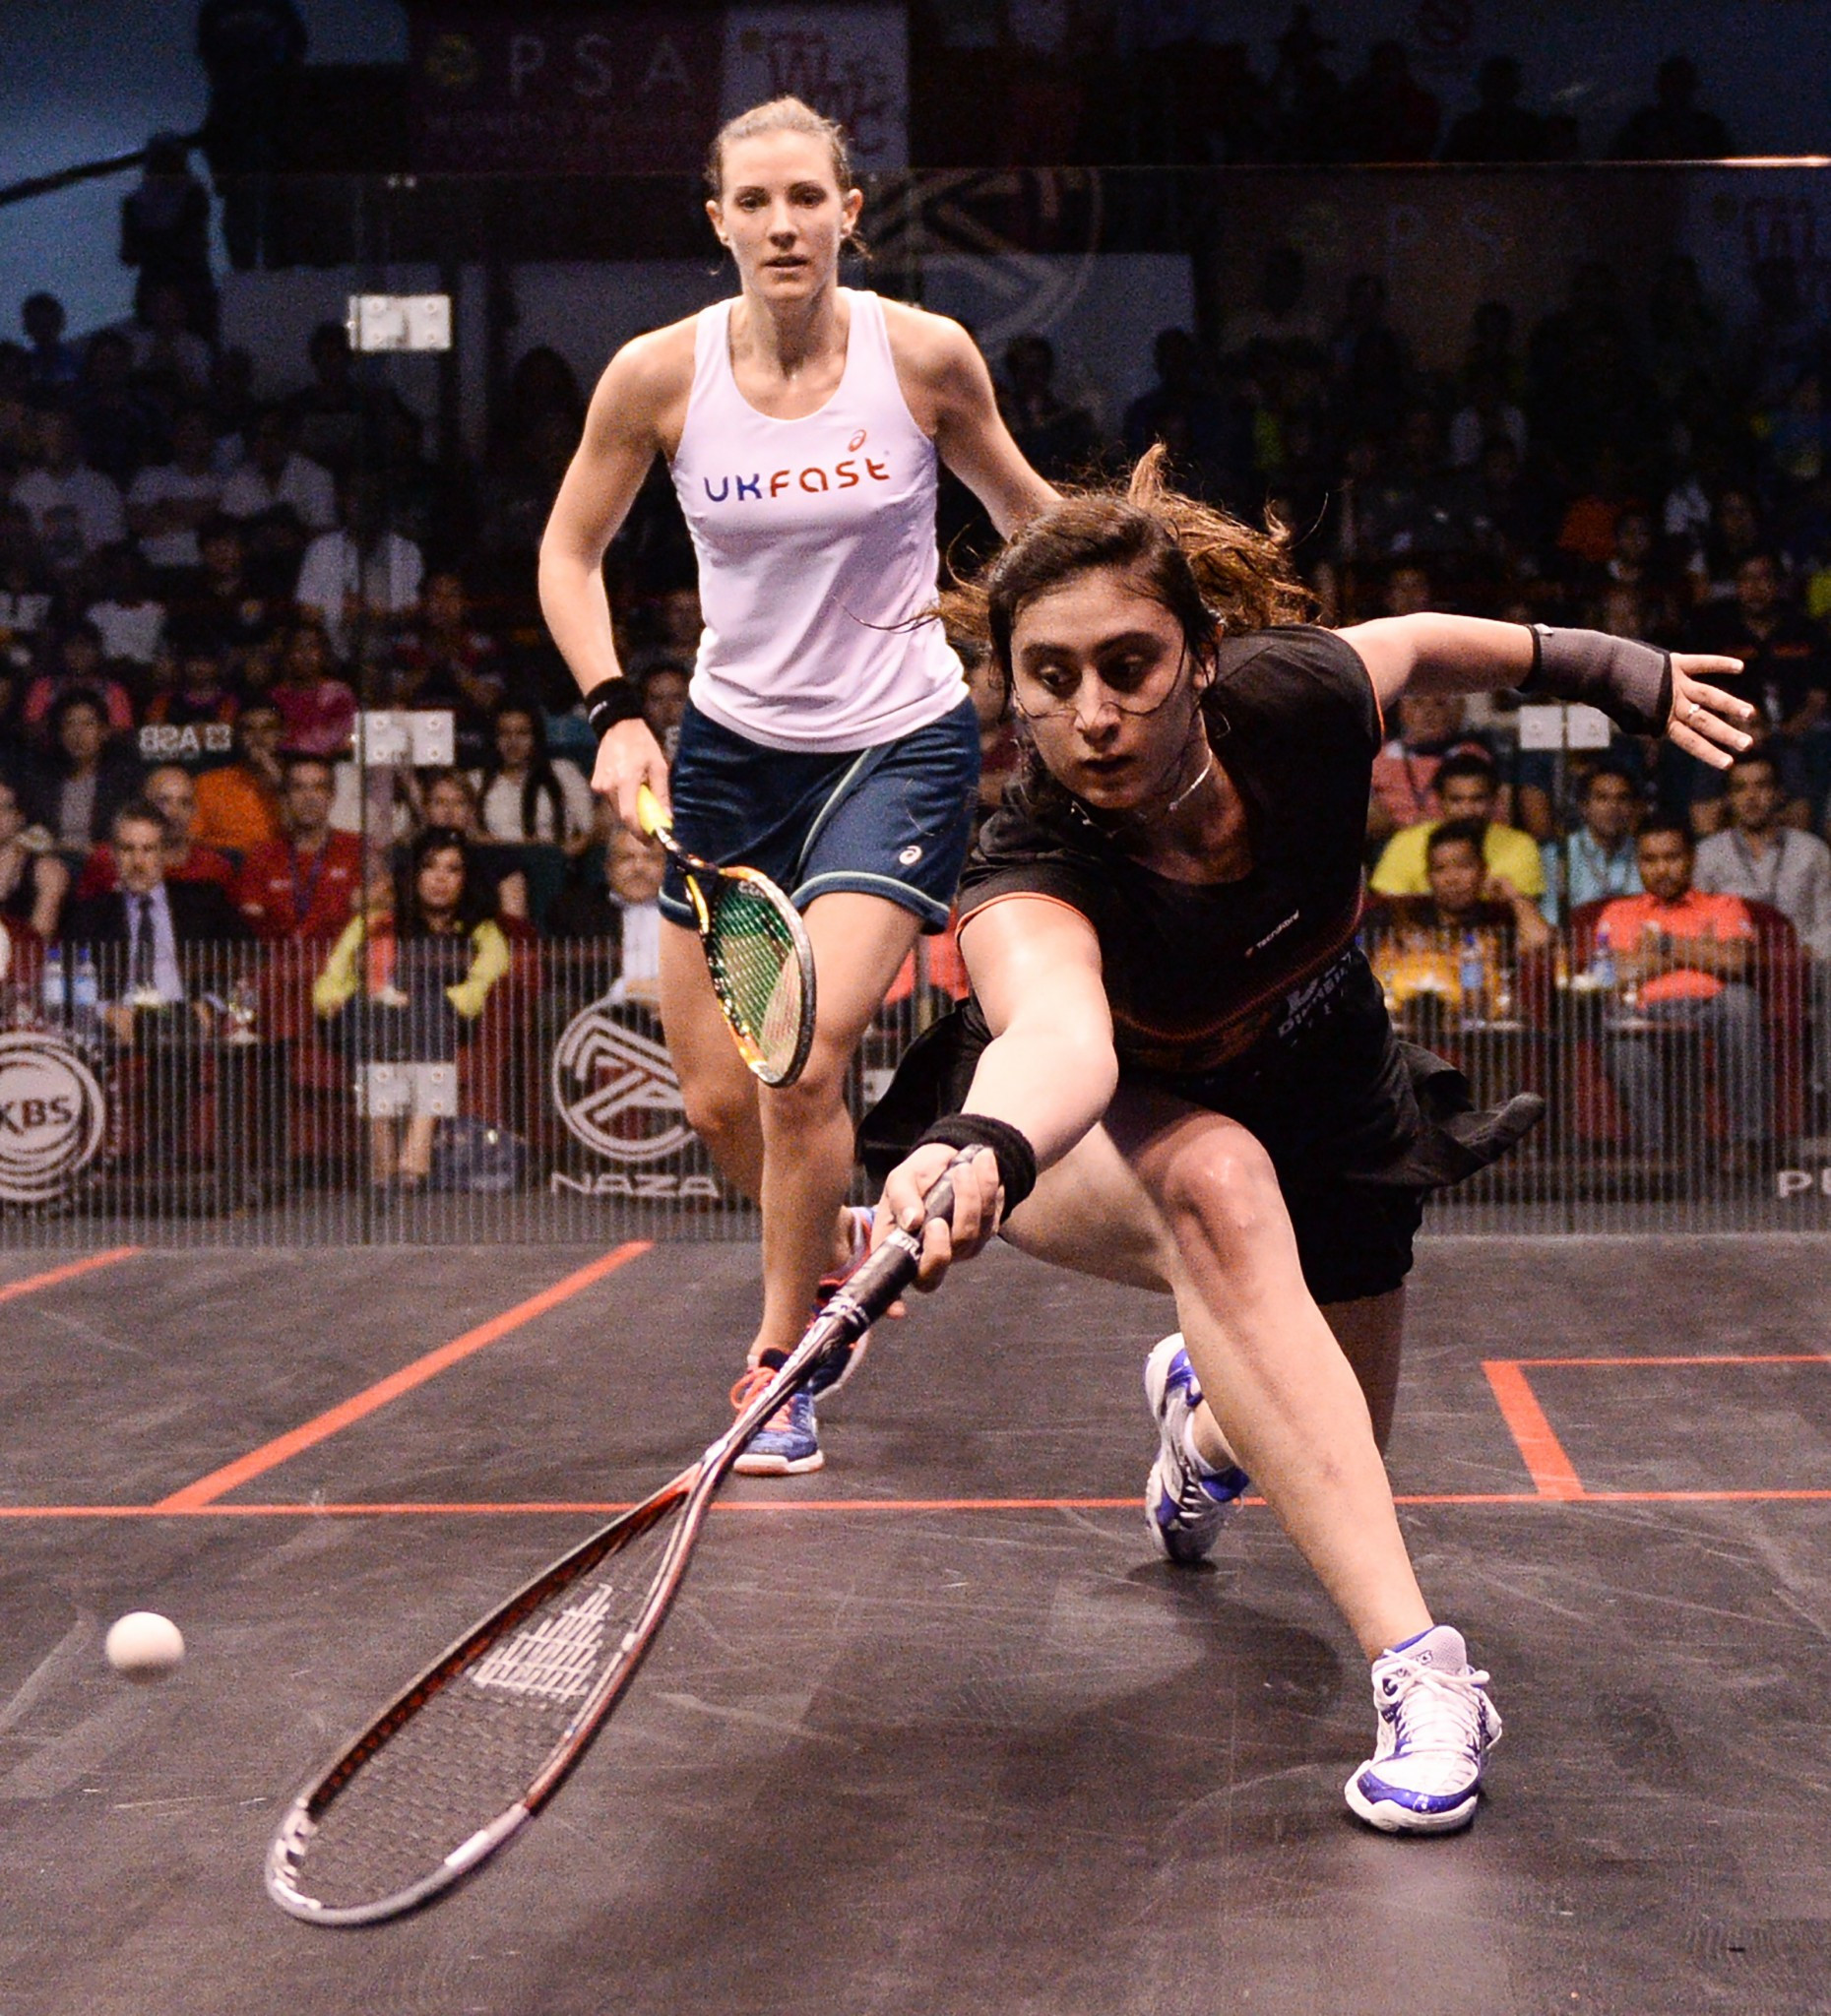 Manchester will host the men's and women's squash World Championships simultaneously ©Getty Images